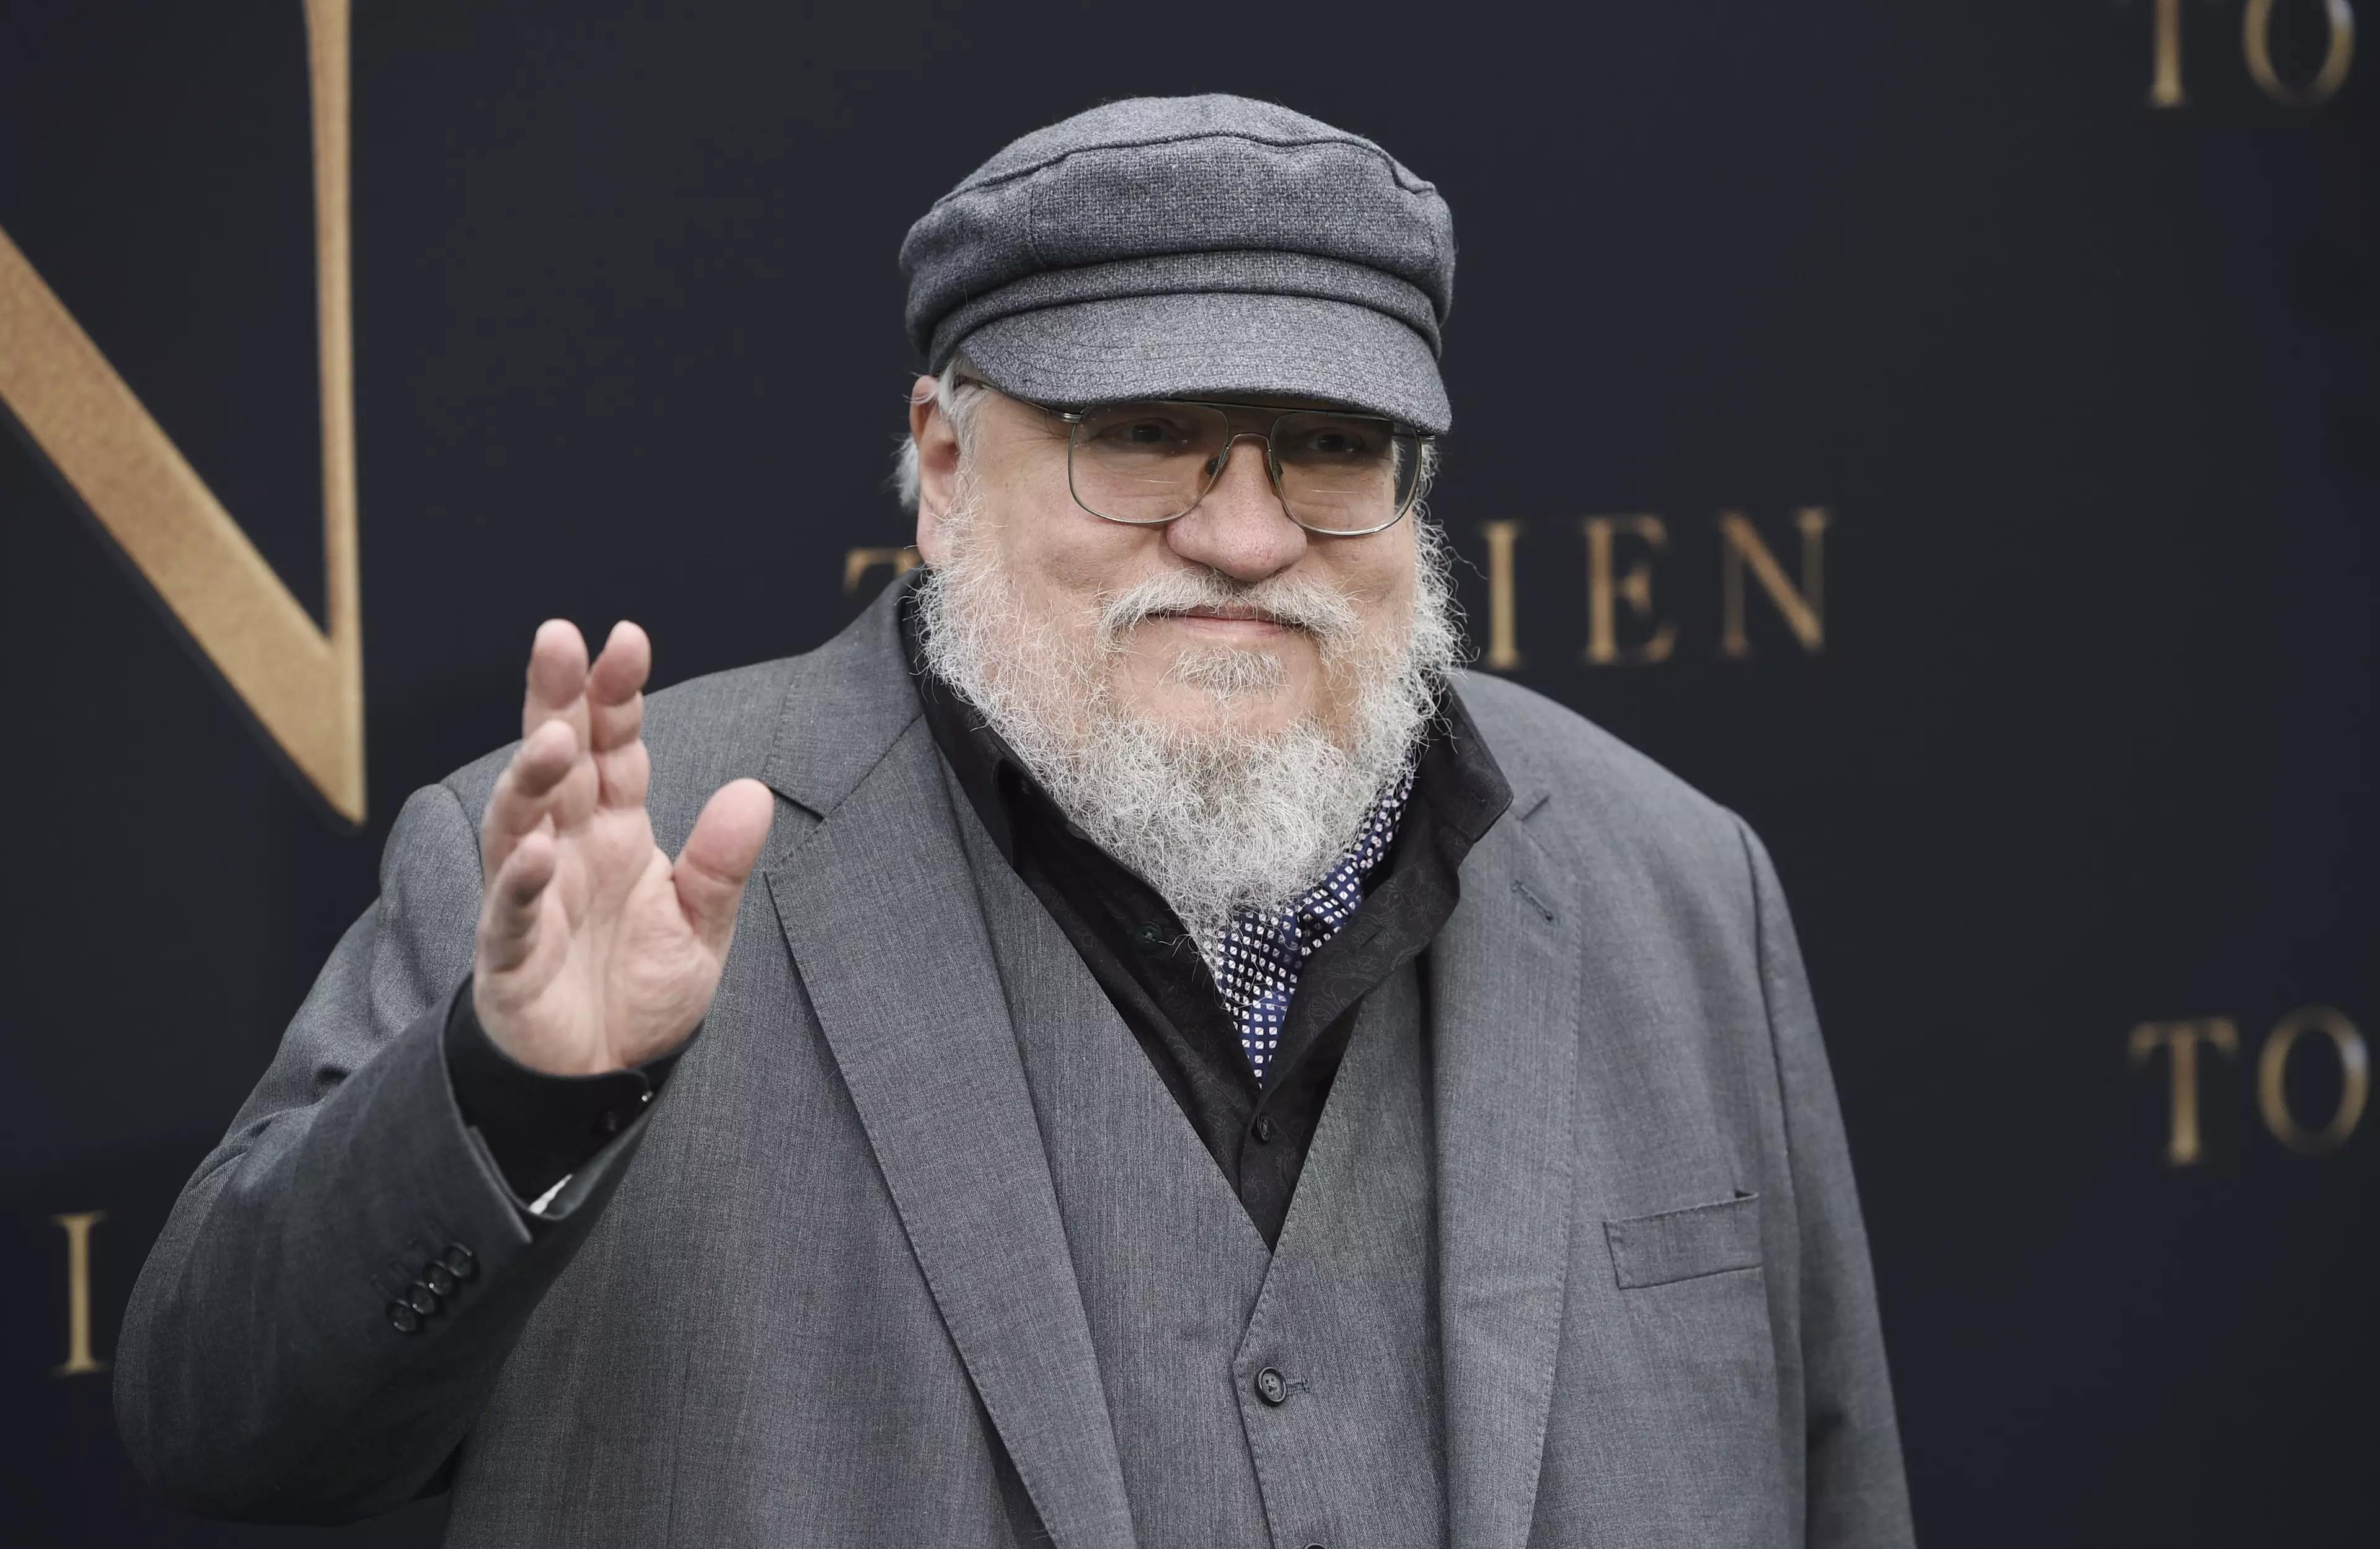 George RR Martin has revealed what he doesn't like about the final season of Game of Thrones.